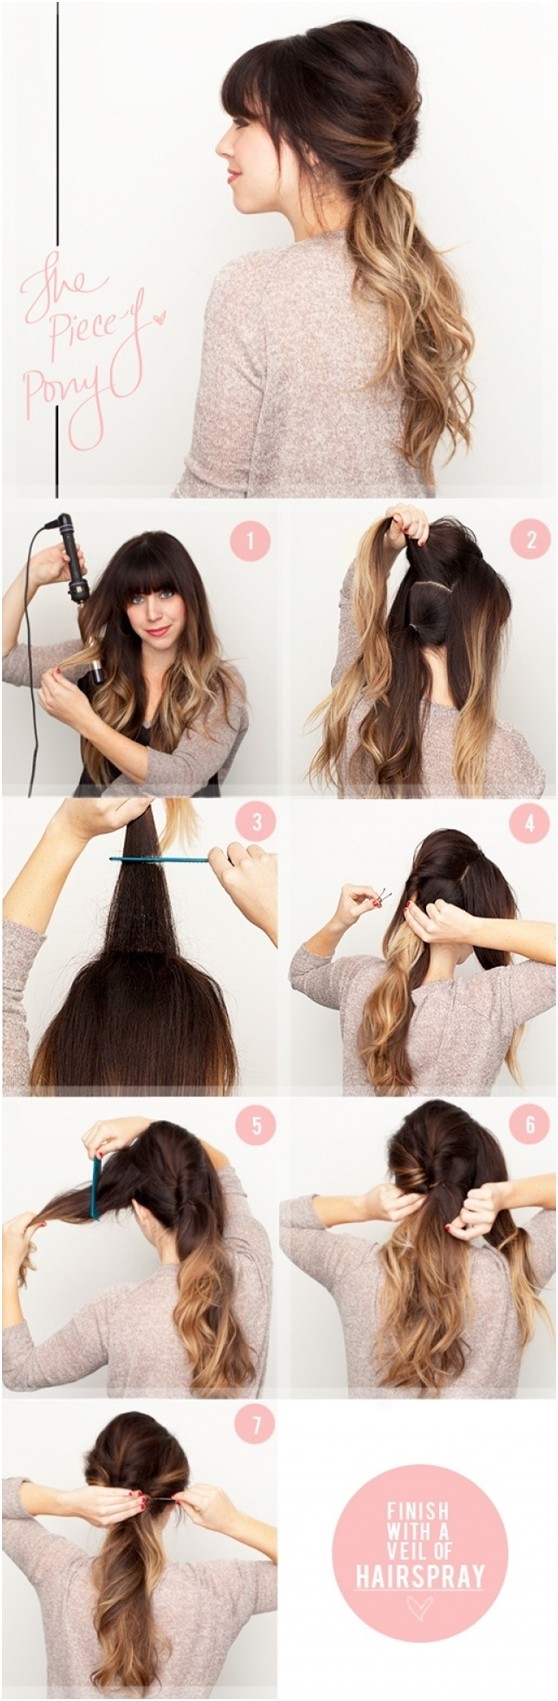 15 Cute and Easy Ponytail Hairstyles Tutorials - PoPular Haircuts